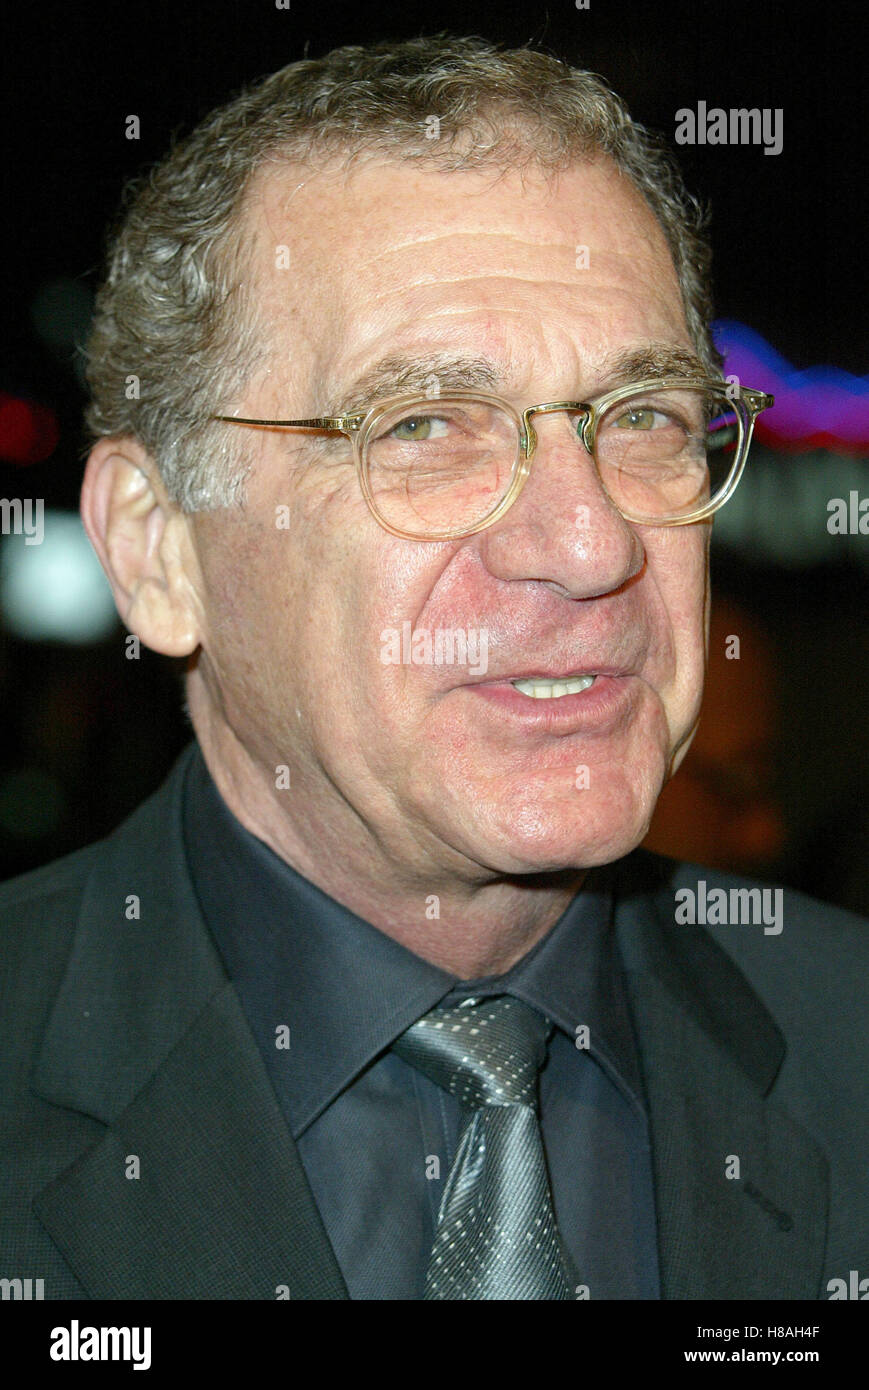 SYDNEY POLLACK COLD MOUNTAIN PREMIERE LOS ANGELES MANN THEATRE WESTWOOD LOS ANGELES USA 07 December 2003 Stock Photo